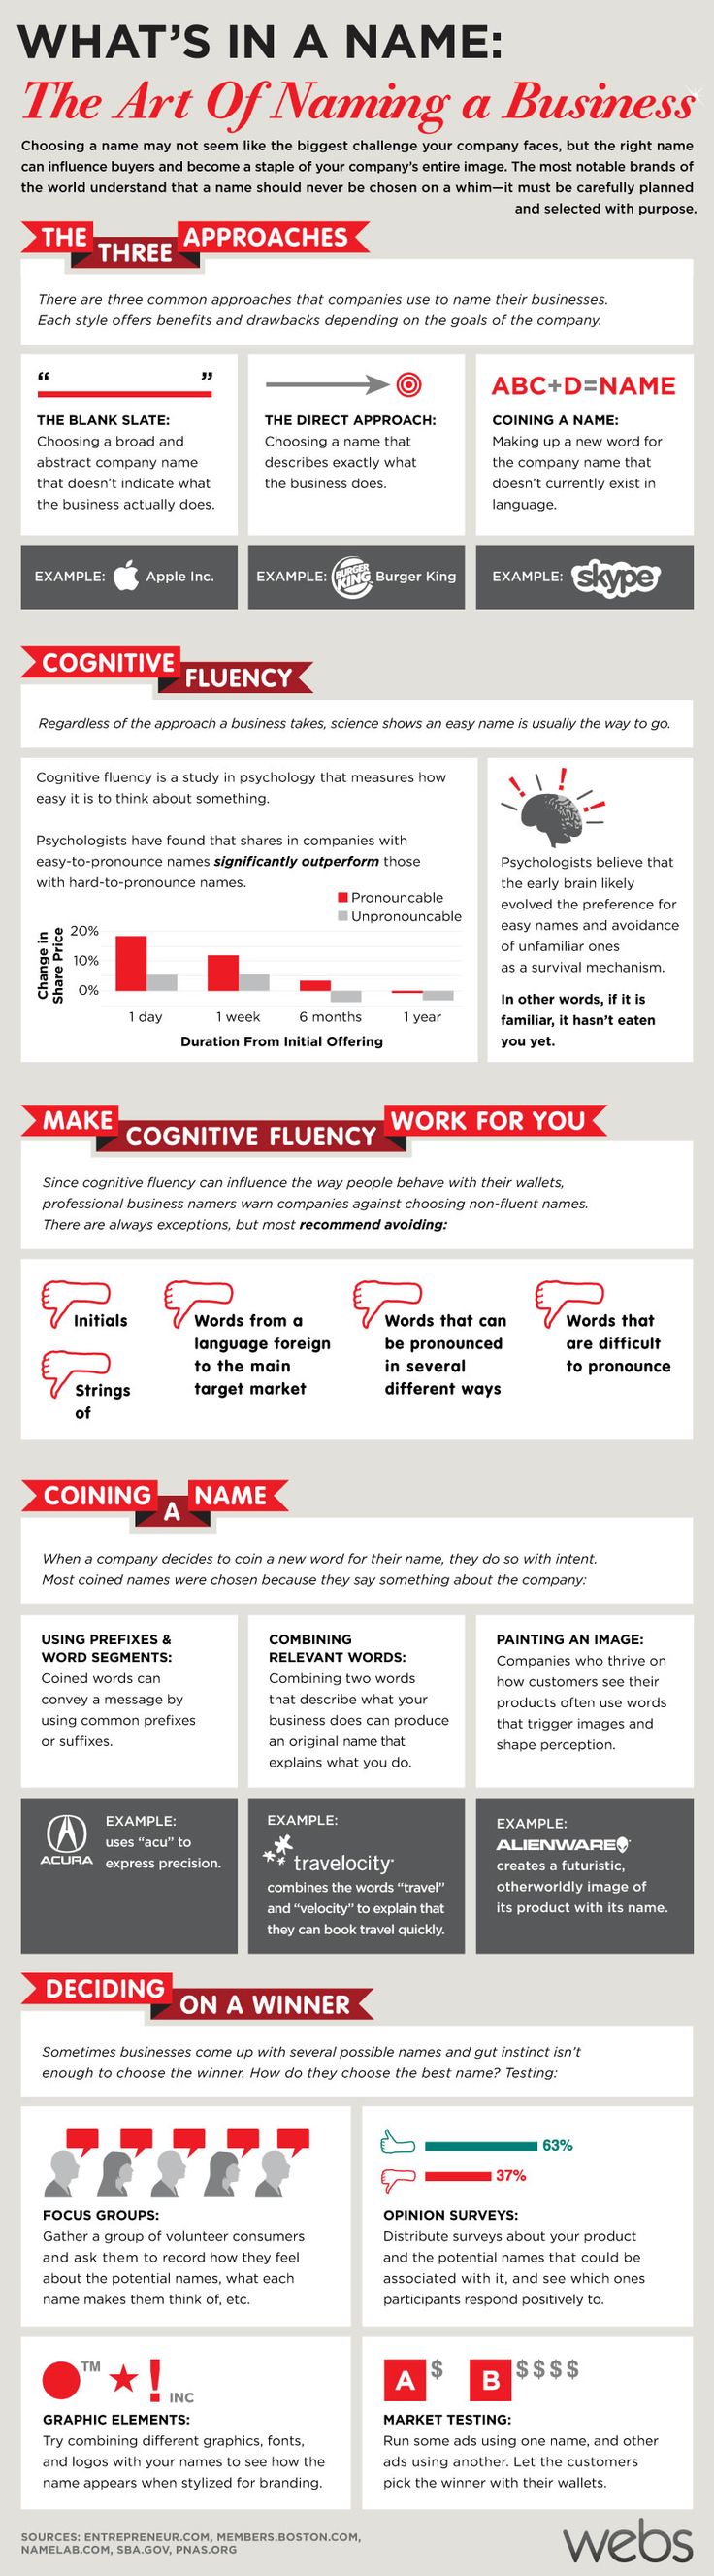 The Art Of Naming A Business [Infographic]